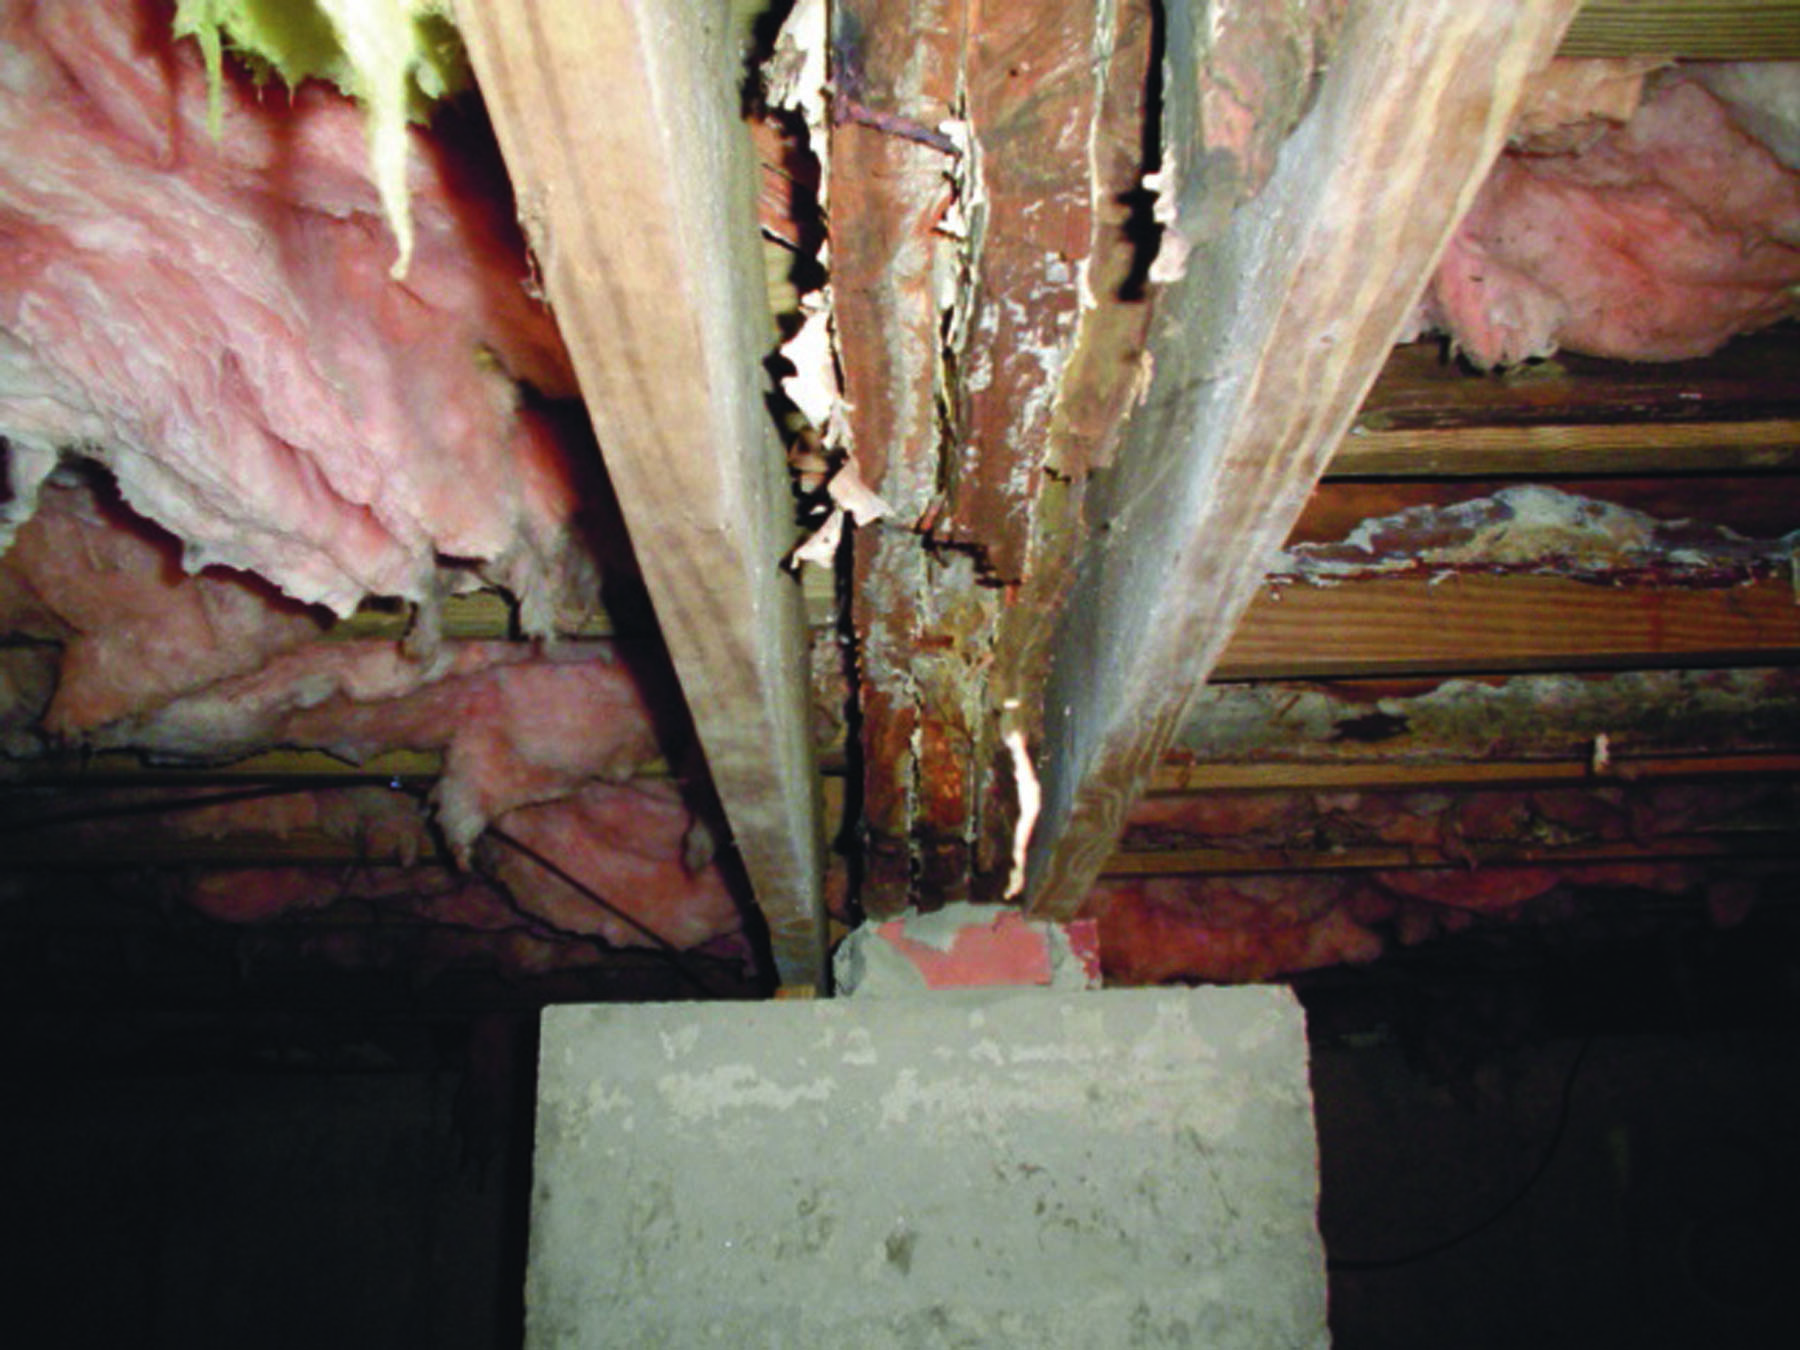 Moldy wood in the crawl space